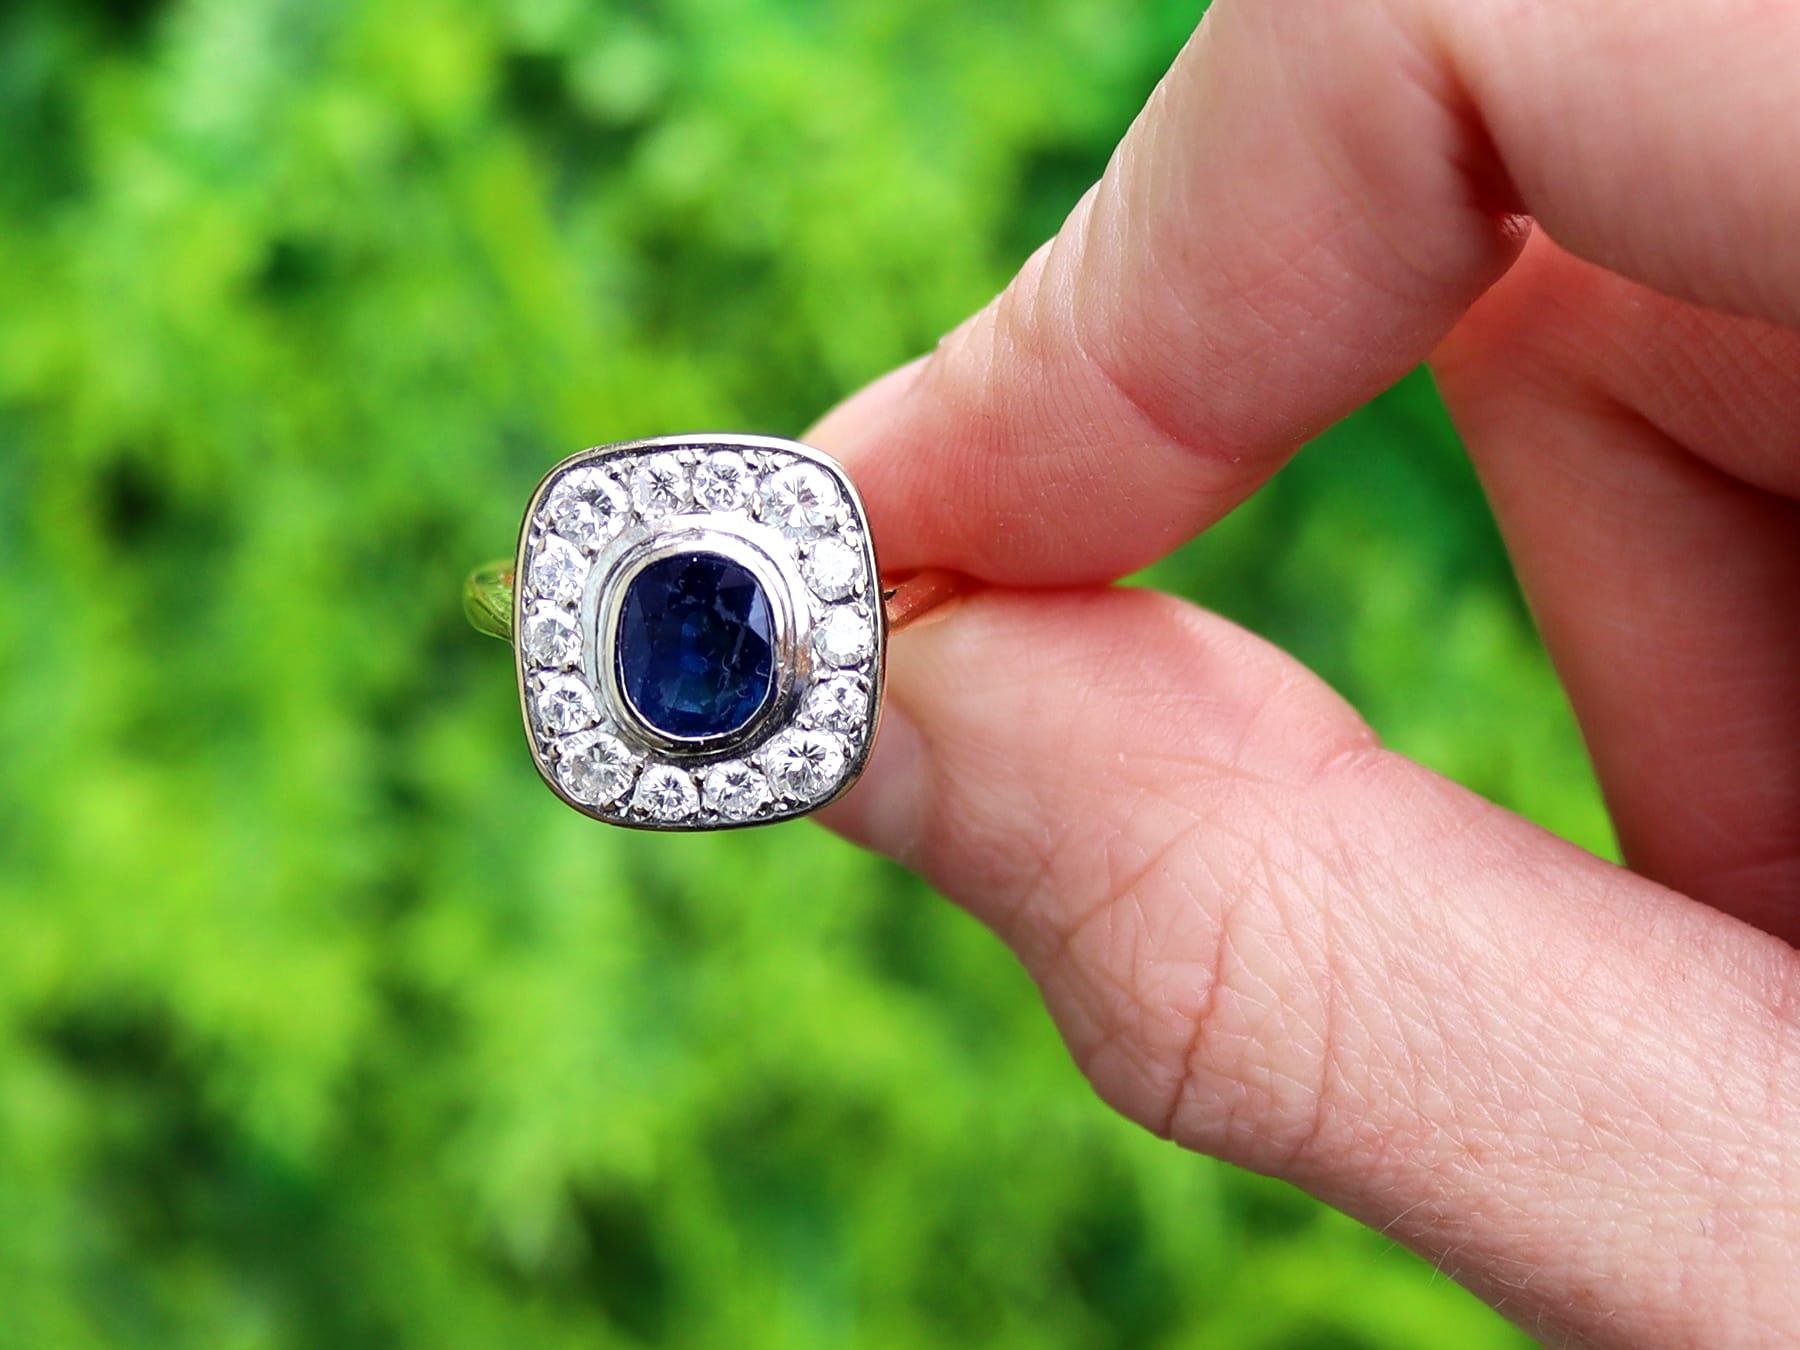 A fine and impressive vintage French 1.02 carat natural blue sapphire and 1.13 carat diamond, 18k yellow gold, 18k white gold set dress ring; part of our vintage jewelry and estate jewelry collections.

This impressive French vintage cluster ring